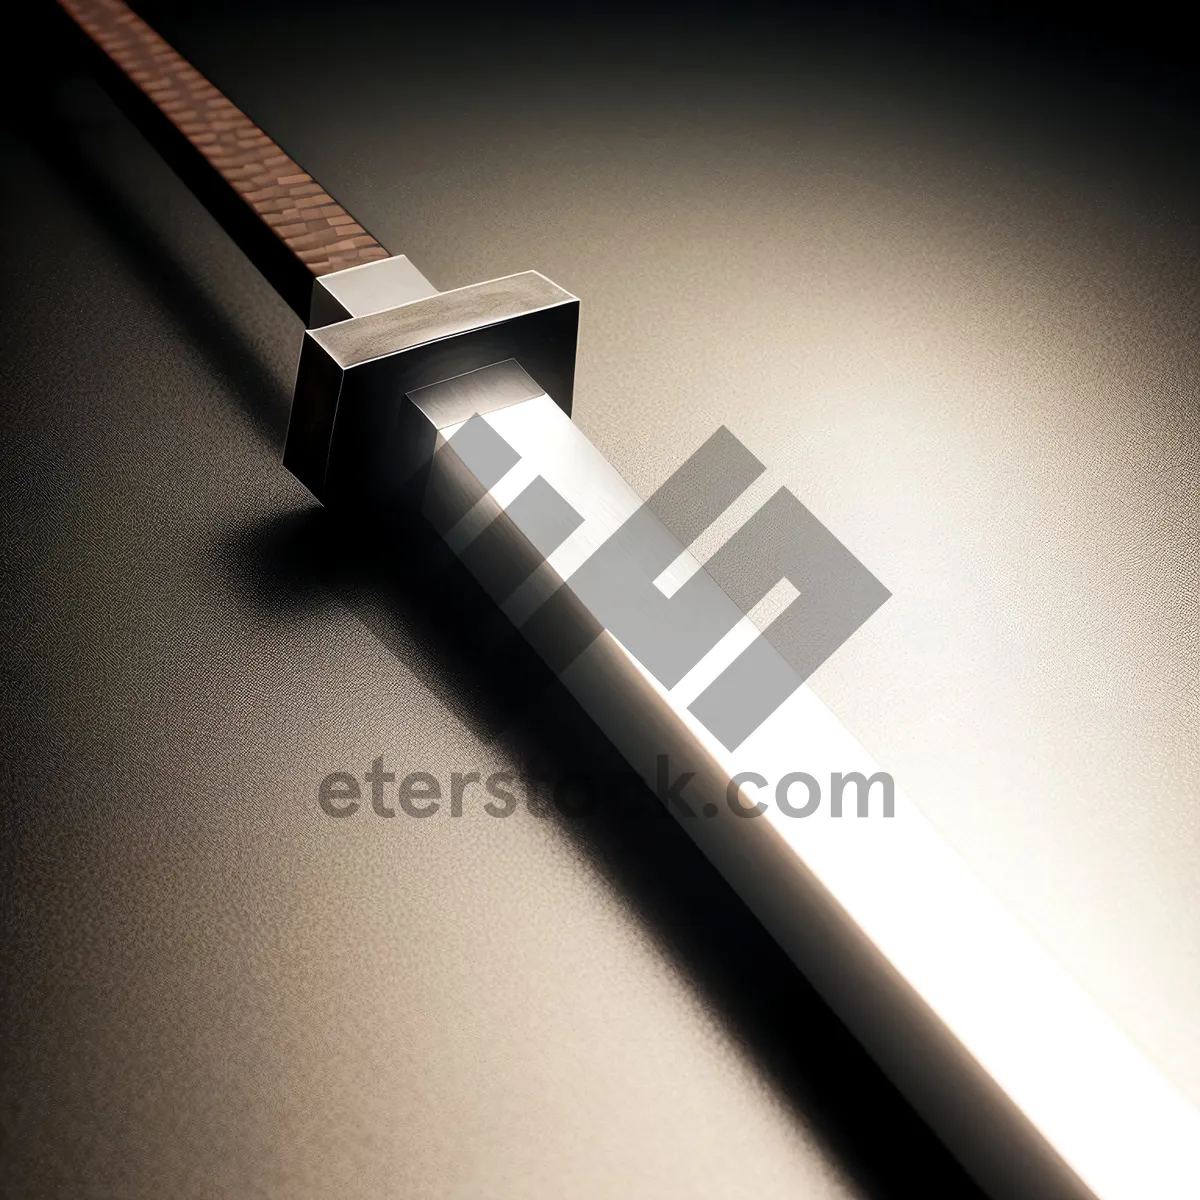 Picture of Sharp-Edged Business Tool: Precision Letter Opener